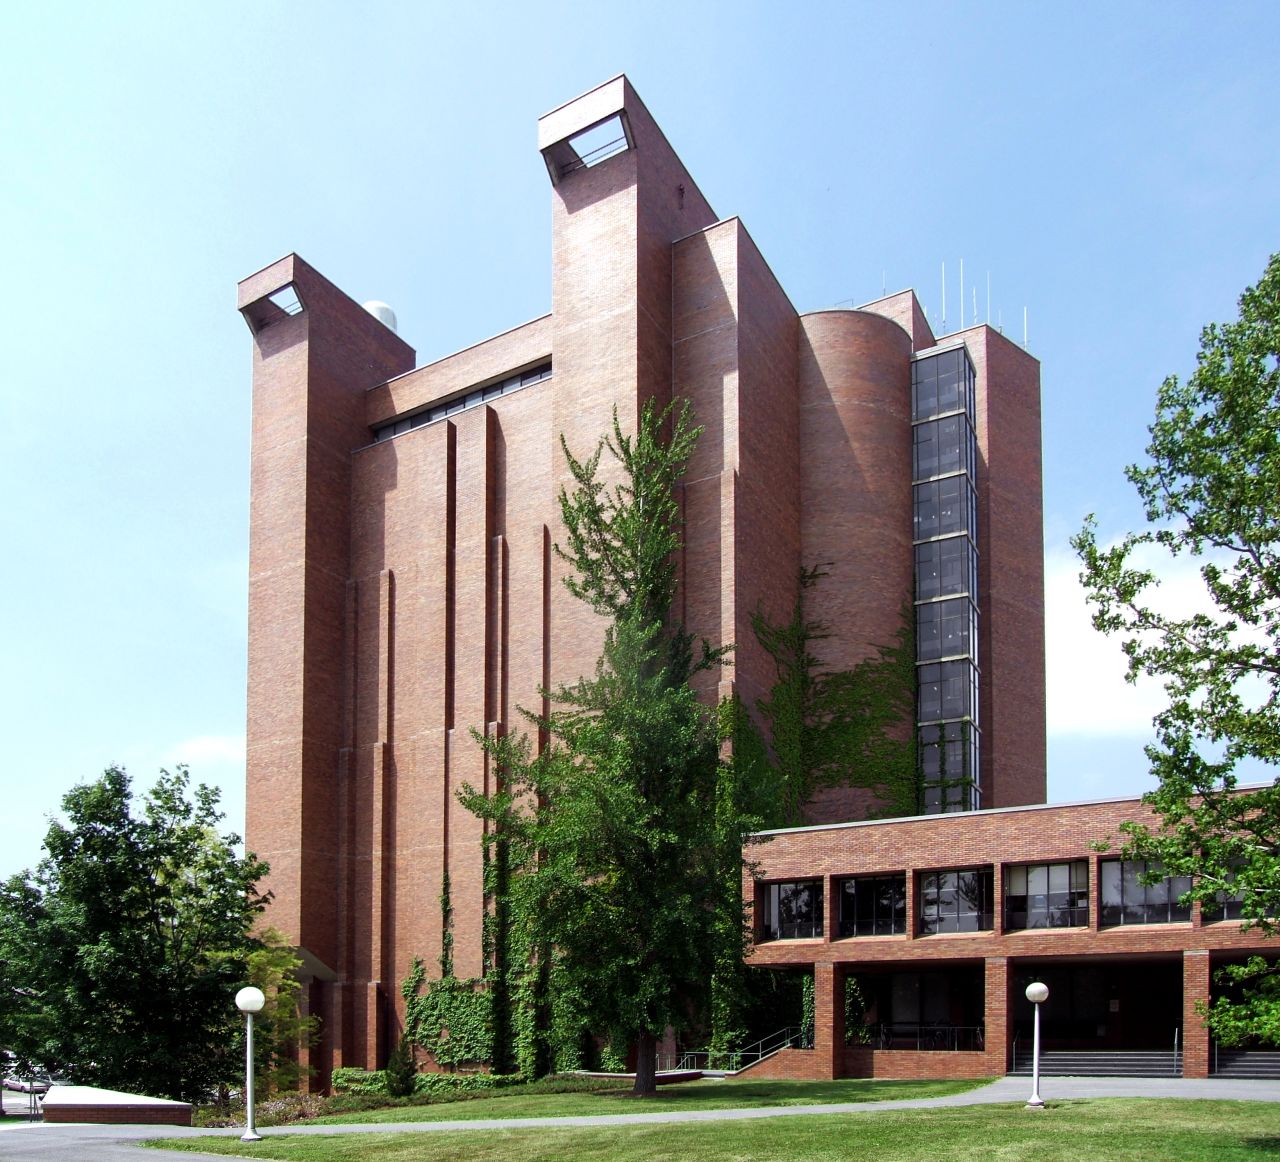 Bradfield Hall at Cornell University in Ithaca, New York, was named for Richard Bradfield, Professor Emeritus, who was head of the Cornell Agronomy Department between 1937 and 1955. The building was designed without windows on the first 10 floors since most laboratories are climate-controlled. <strong>Architects:</strong> Ulrich Franzen & Associates